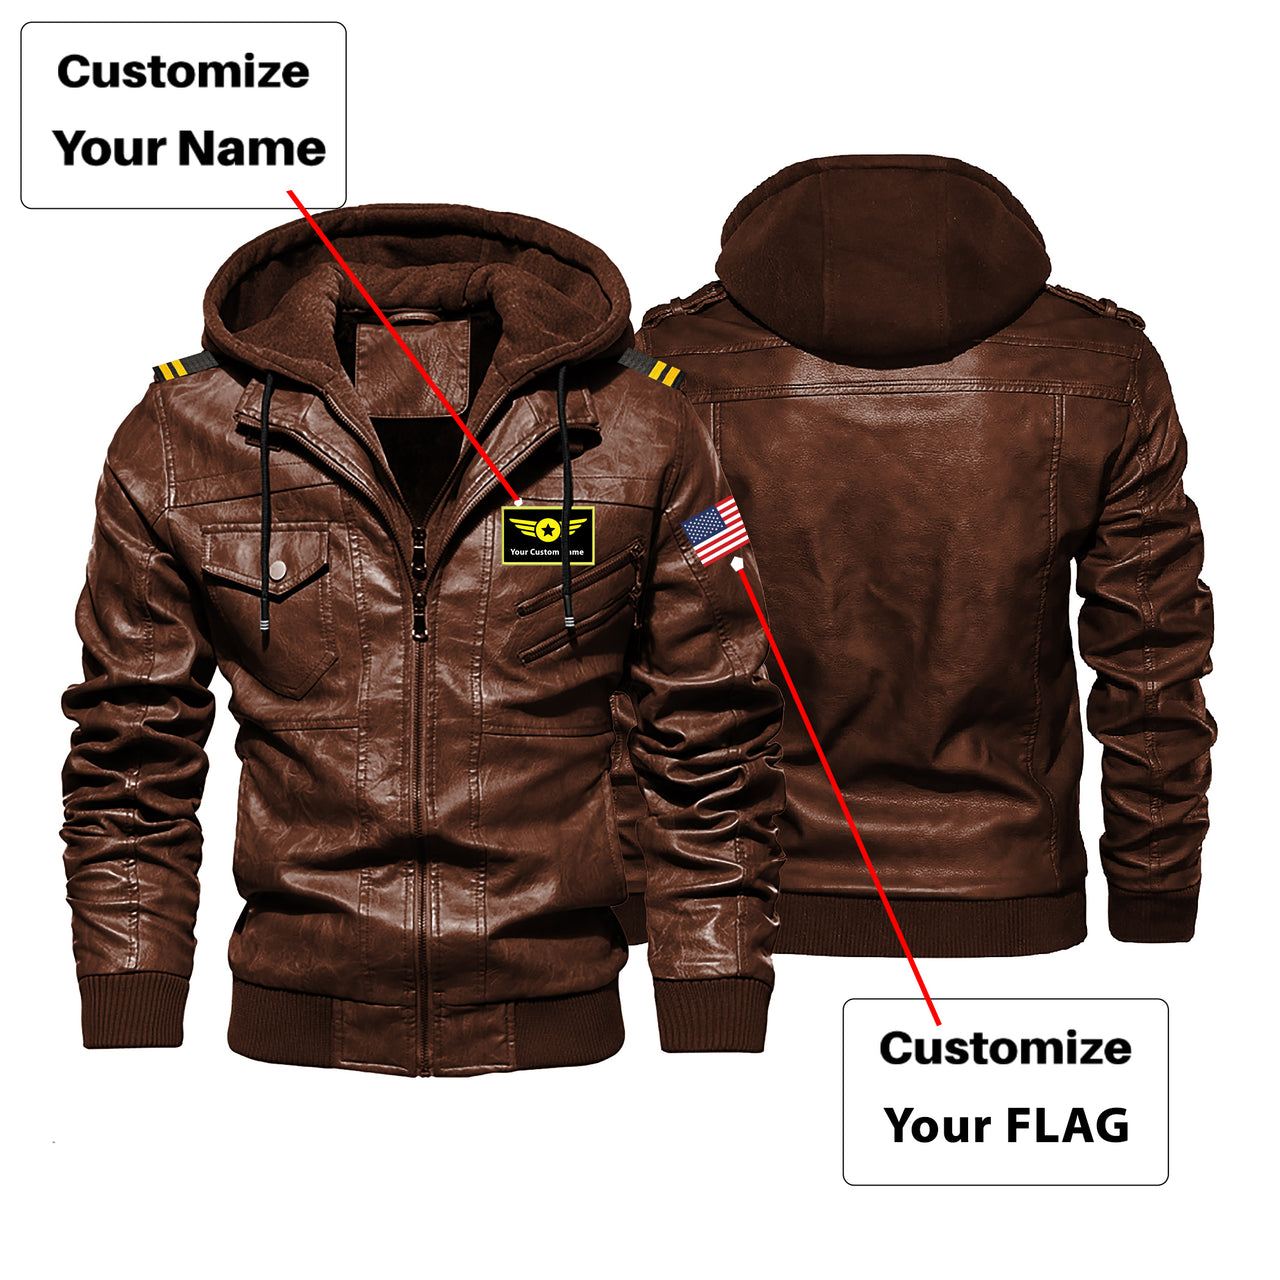 Custom Flag & Name with EPAULETTES "Special Badge" Designed Hooded Leather Jackets